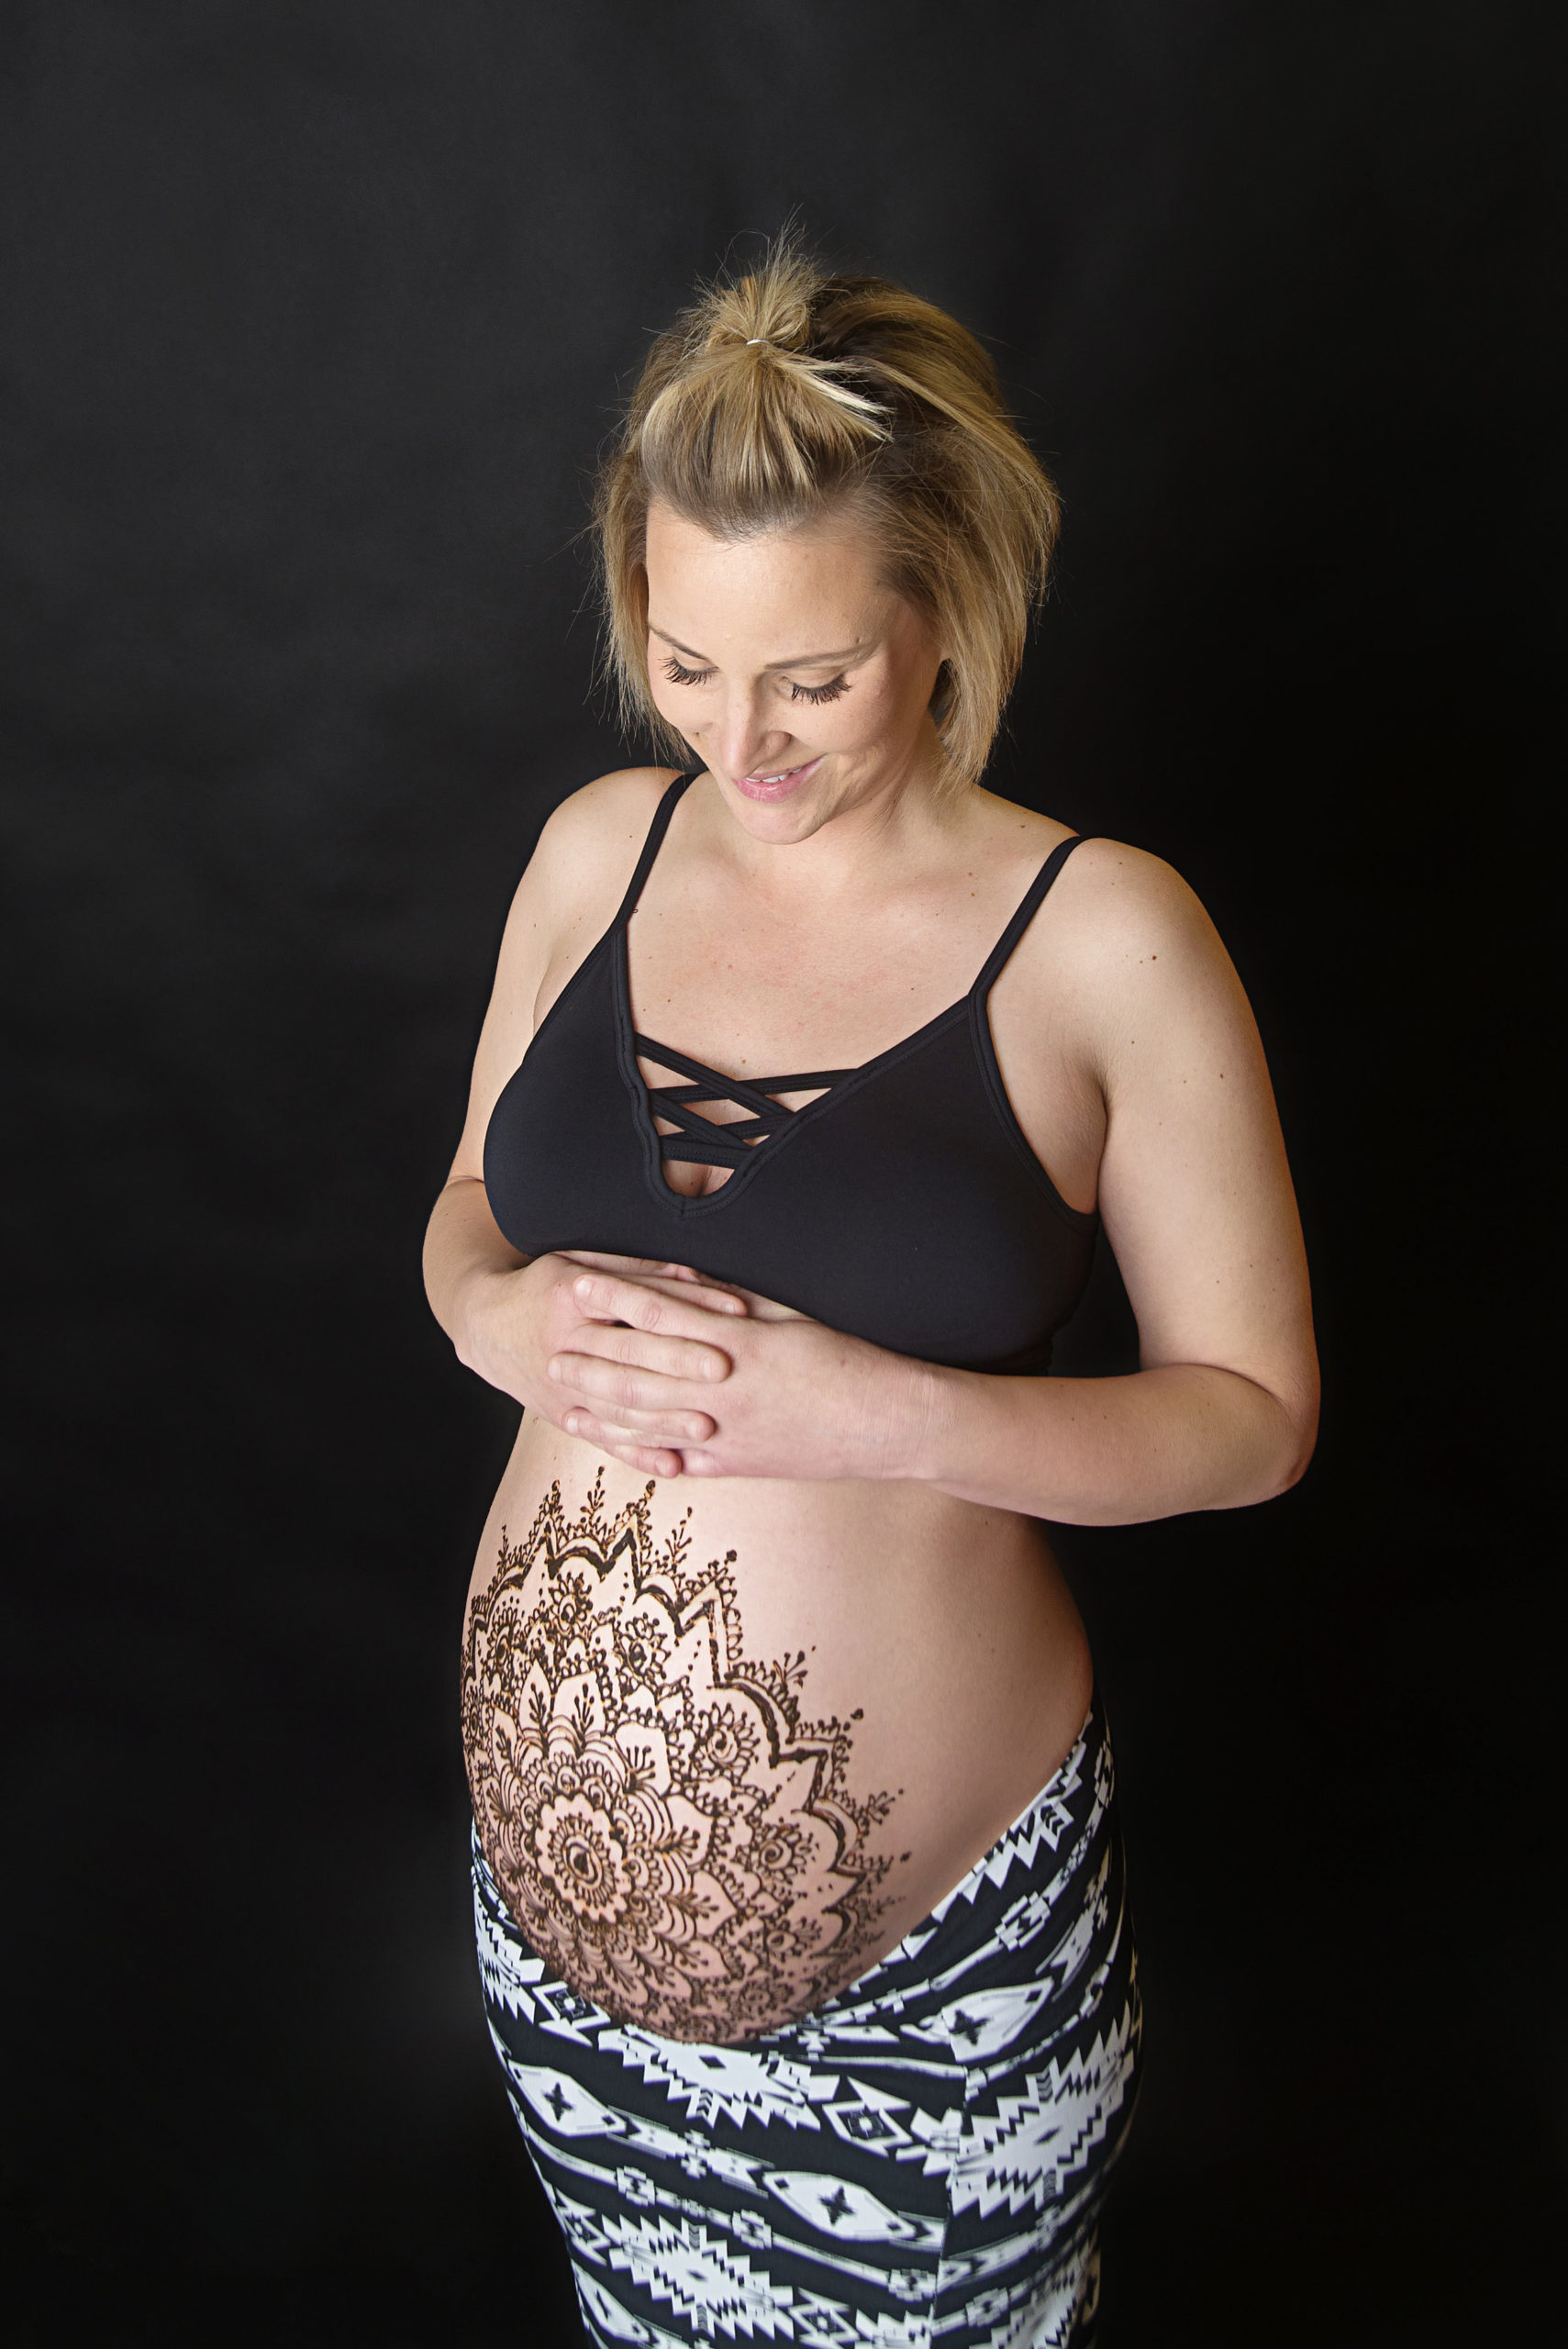 st-louis-maternity-henna-photography-mom-with-henna-on-pregnant-belly-on-black-background-looking-down.jpg